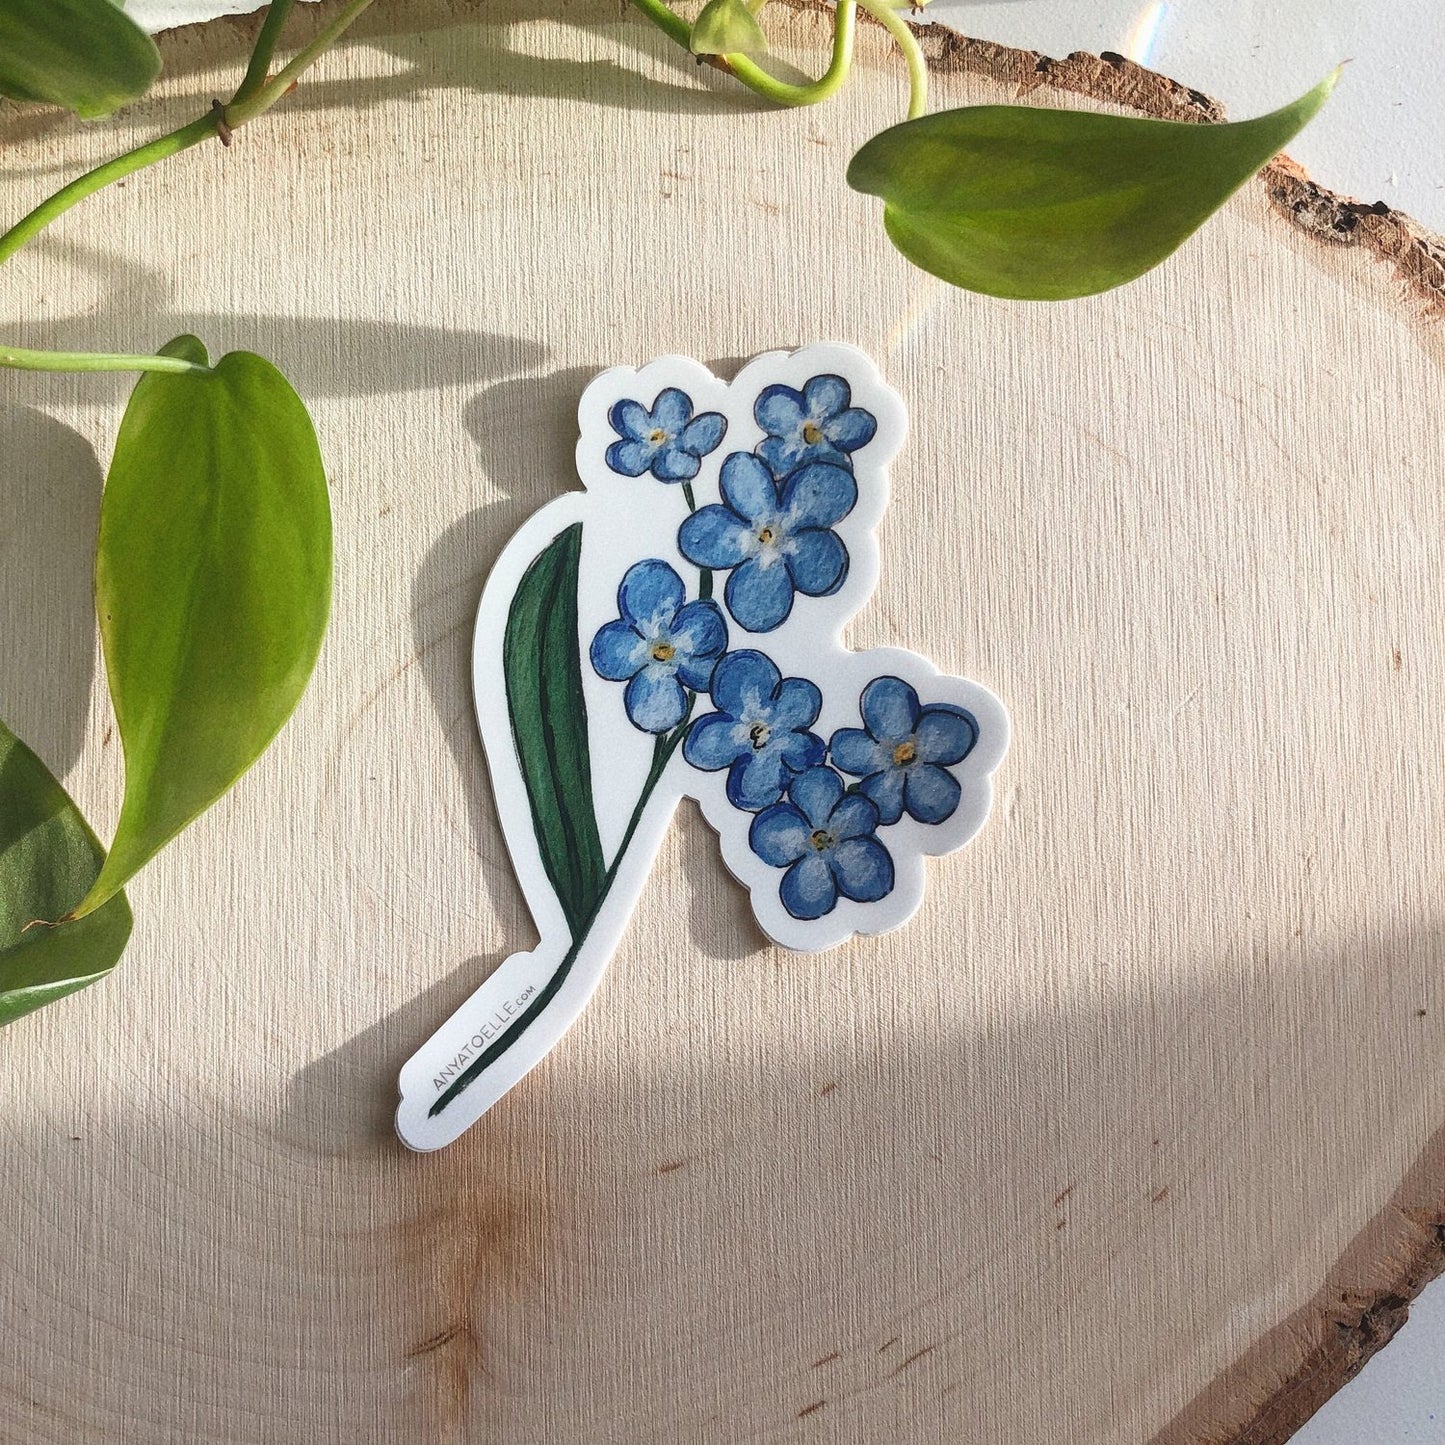 Forget-Me-Not Sticker by Anya Toelle